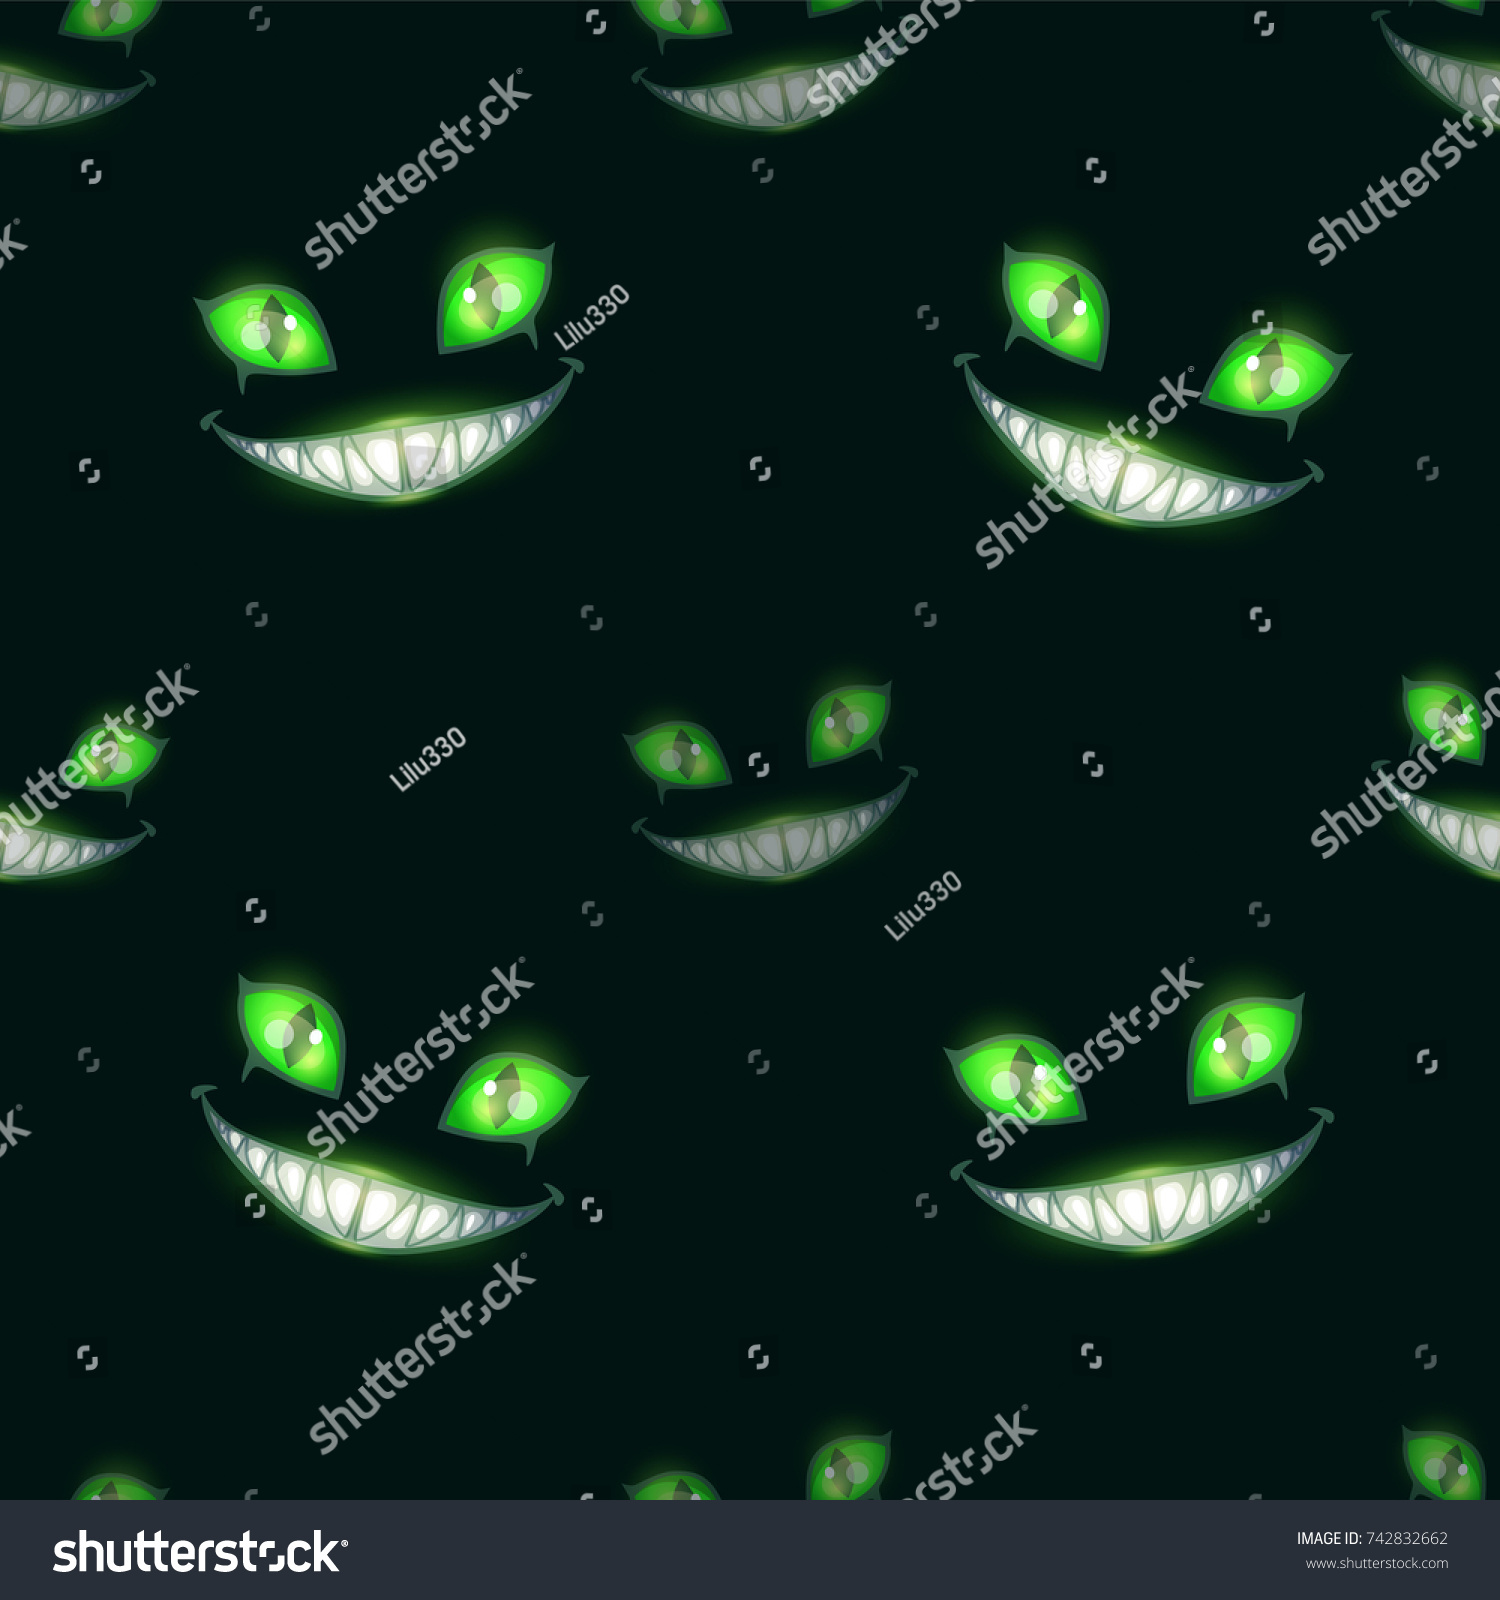 SVG of Seamless pattern with scary monster faces on black background. Green eyes and big evil smile. svg